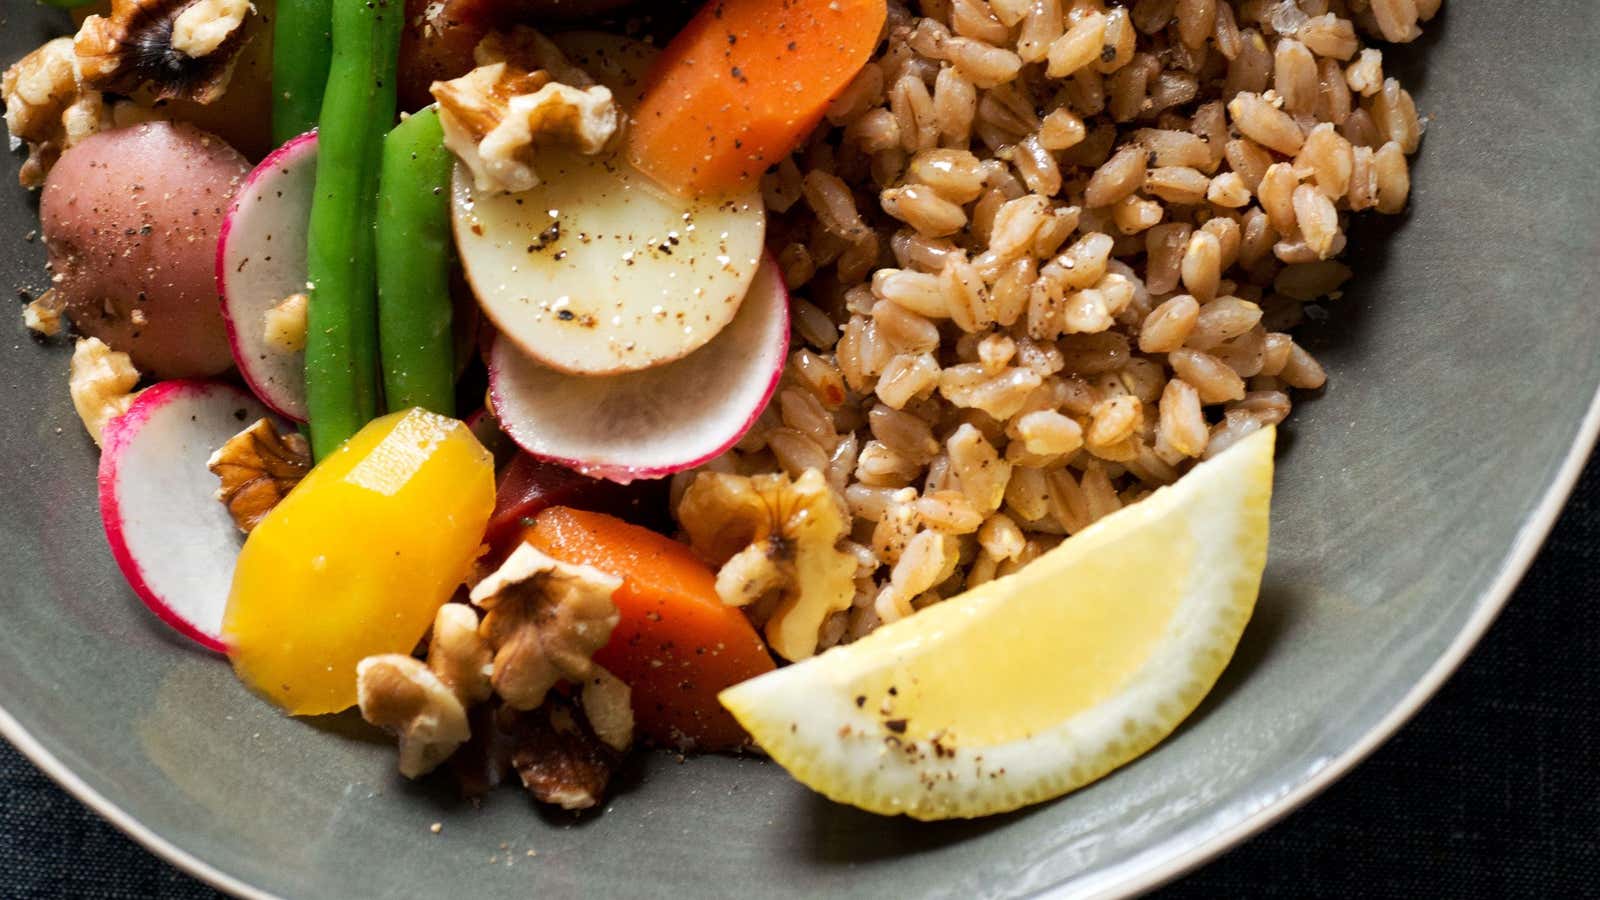 “Bowl” by Lukas Volger is full of beautiful meals like this farro and vegetable dish.